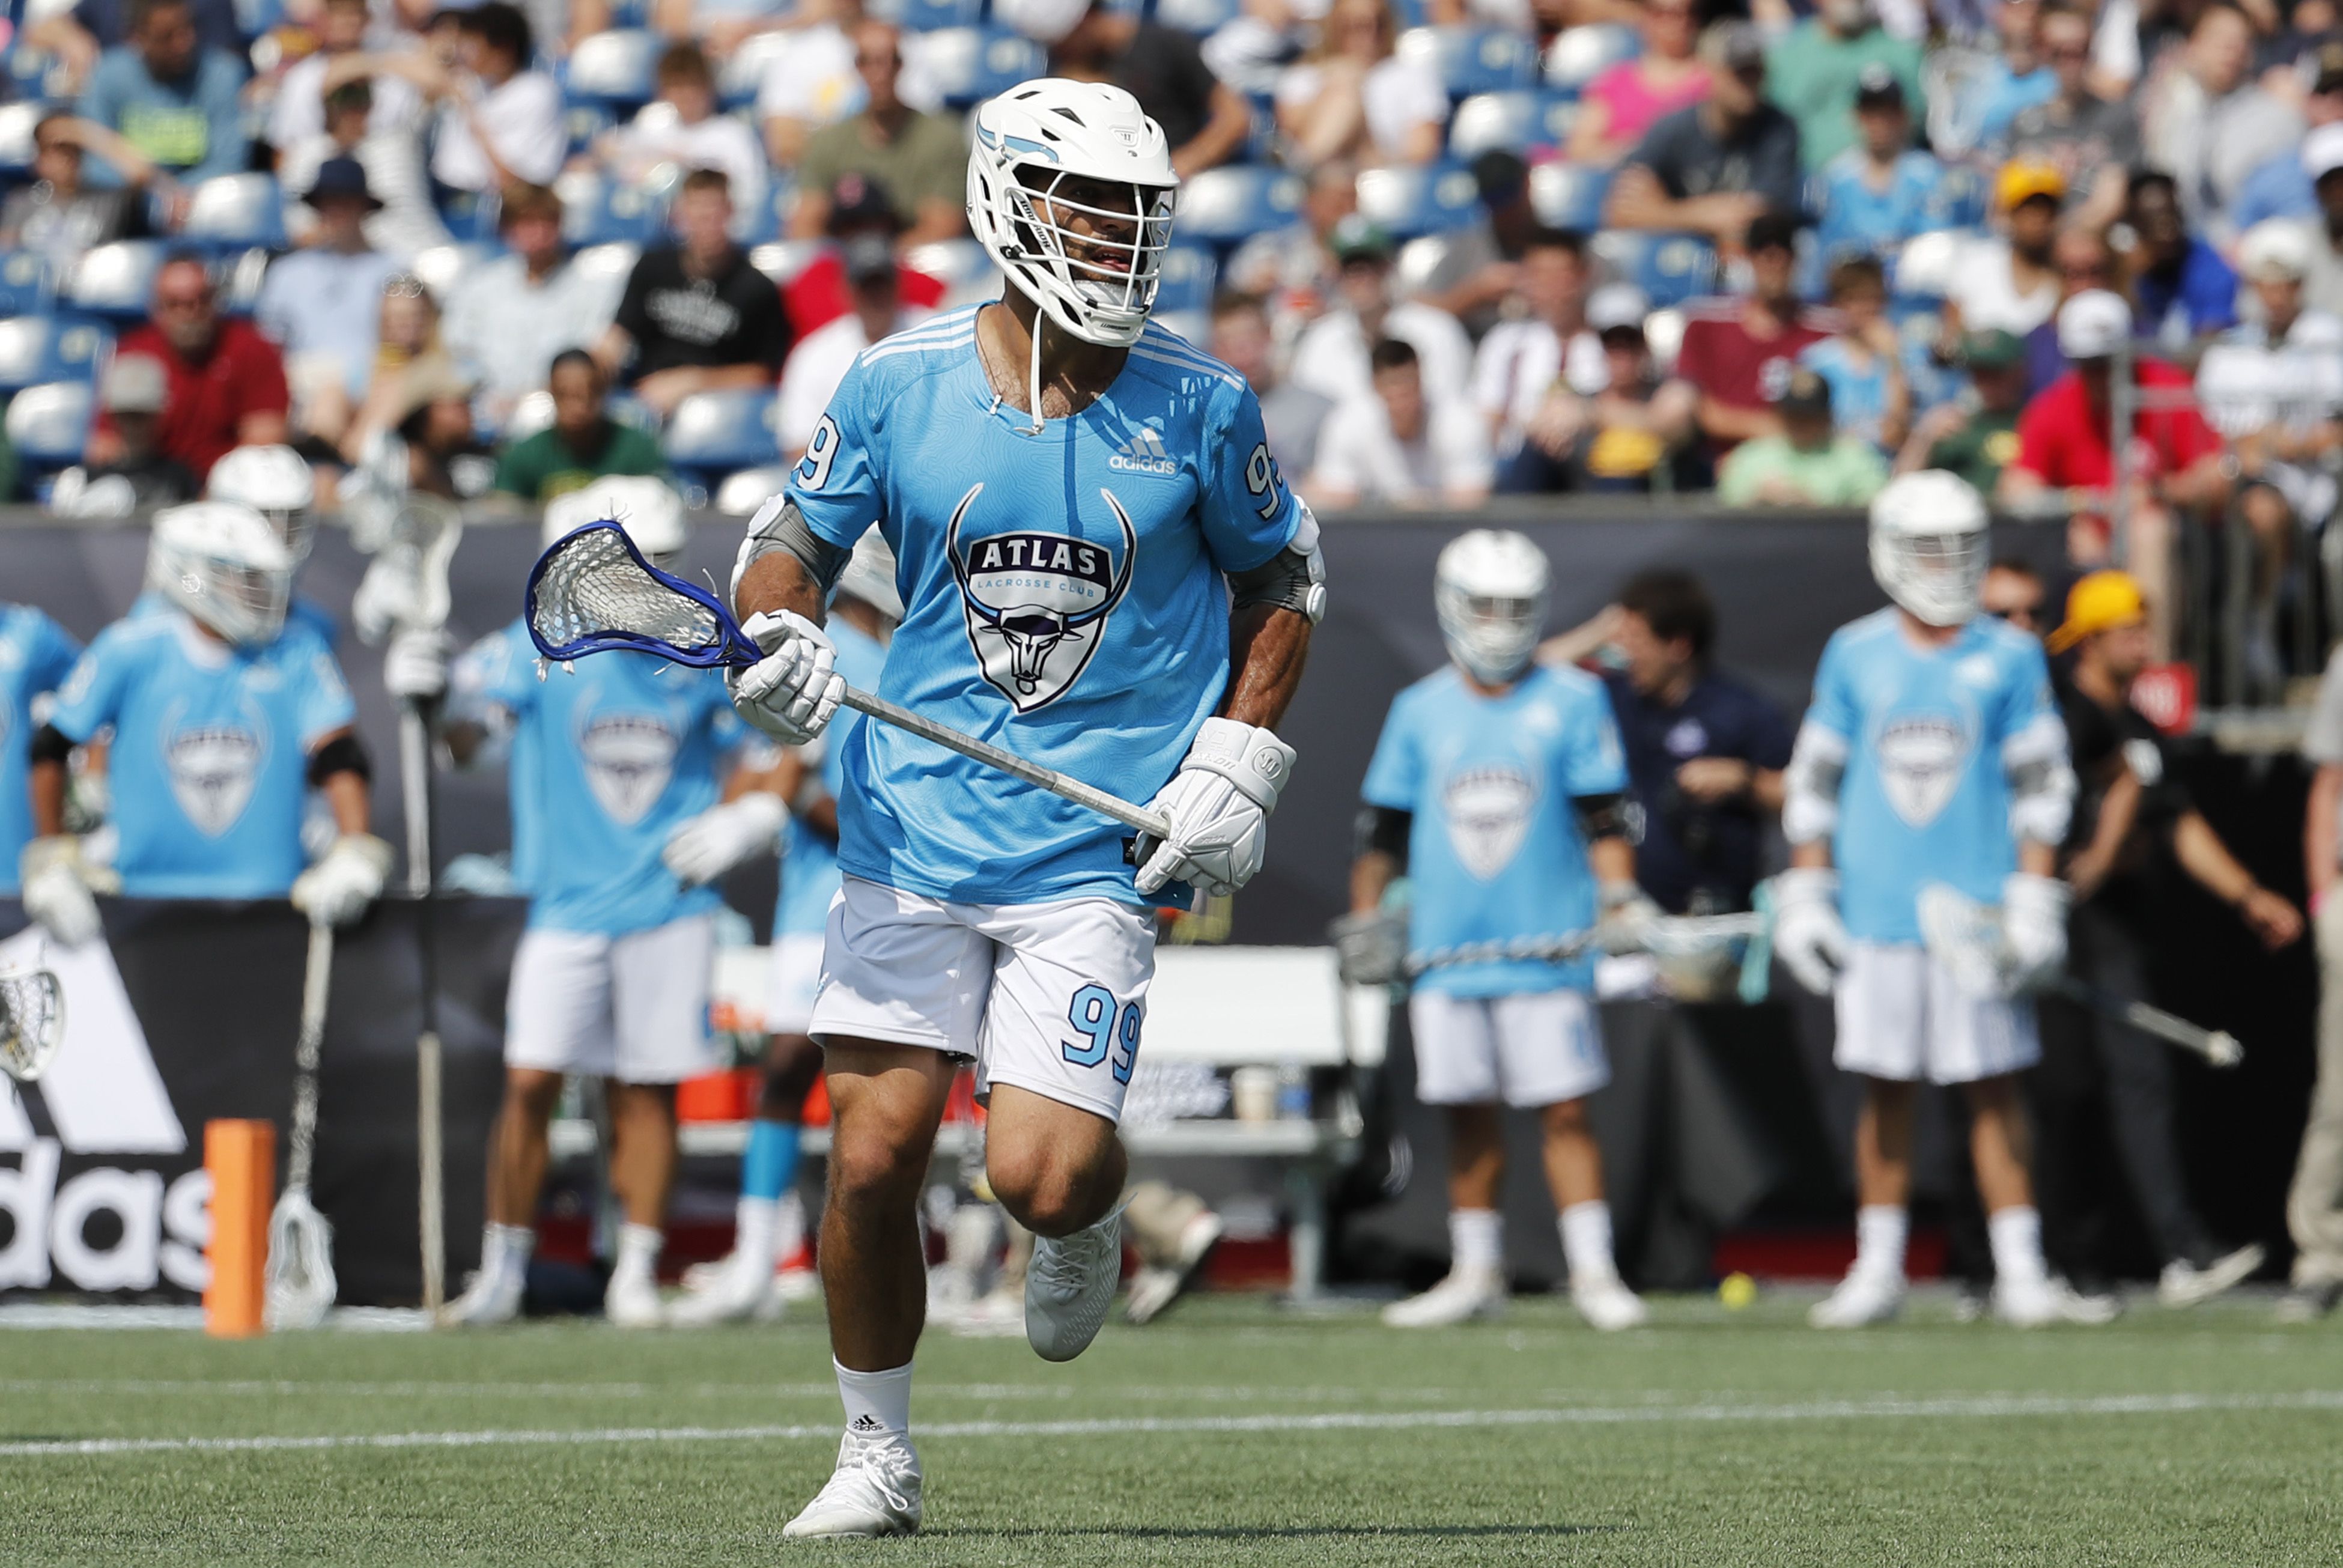 Lacrosse star Paul Rabil says only one pro league will survive